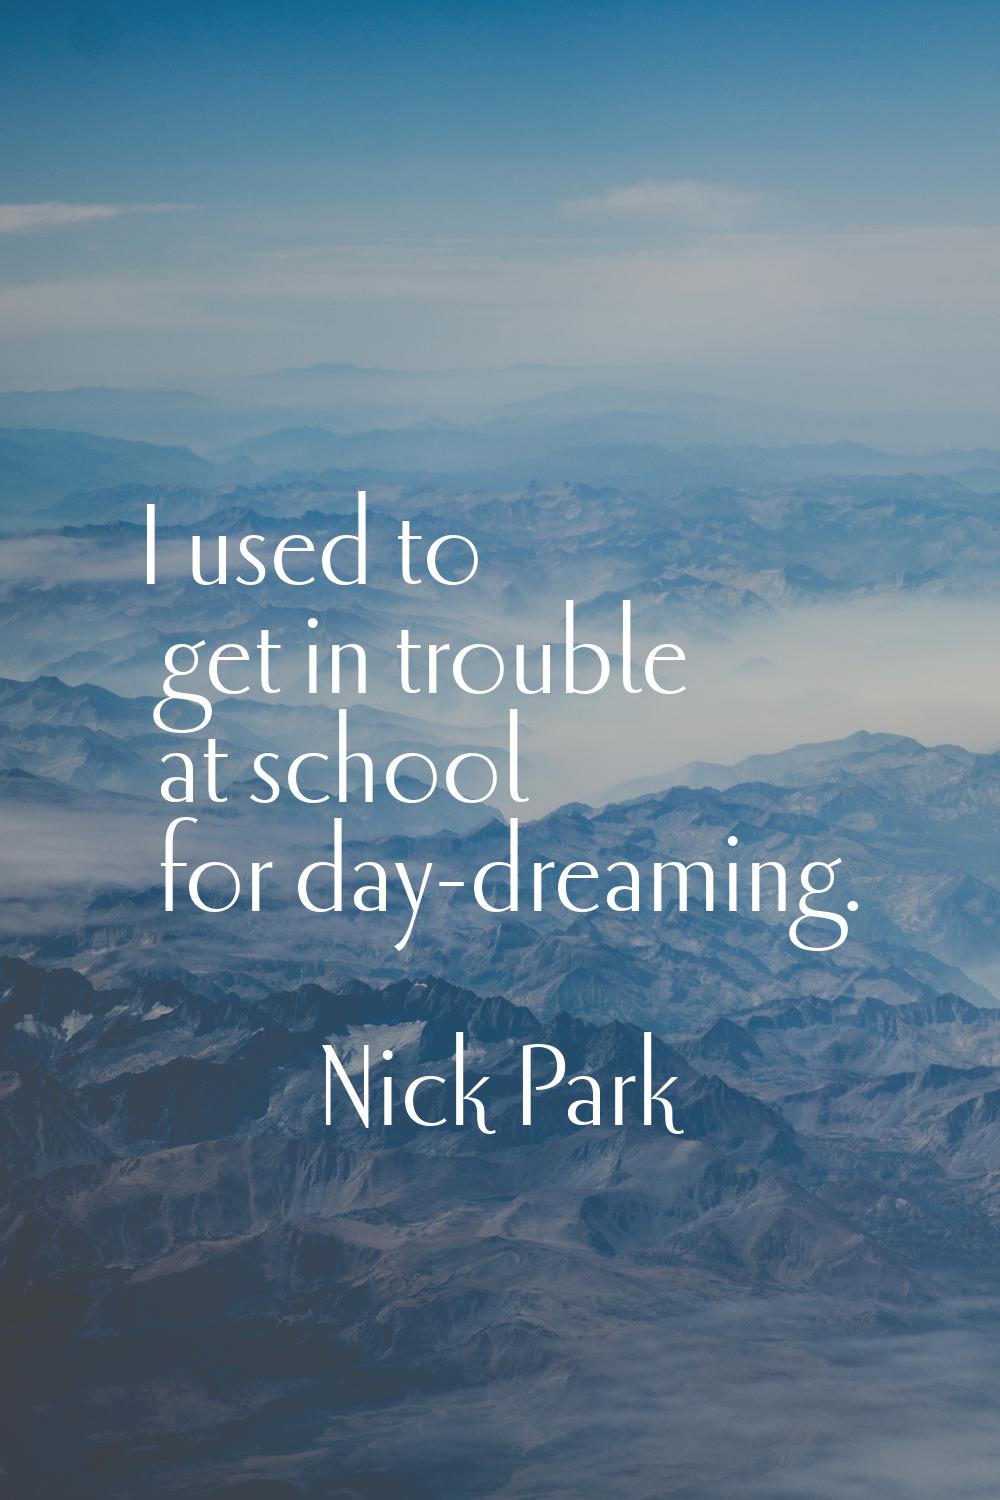 I used to get in trouble at school for day-dreaming.